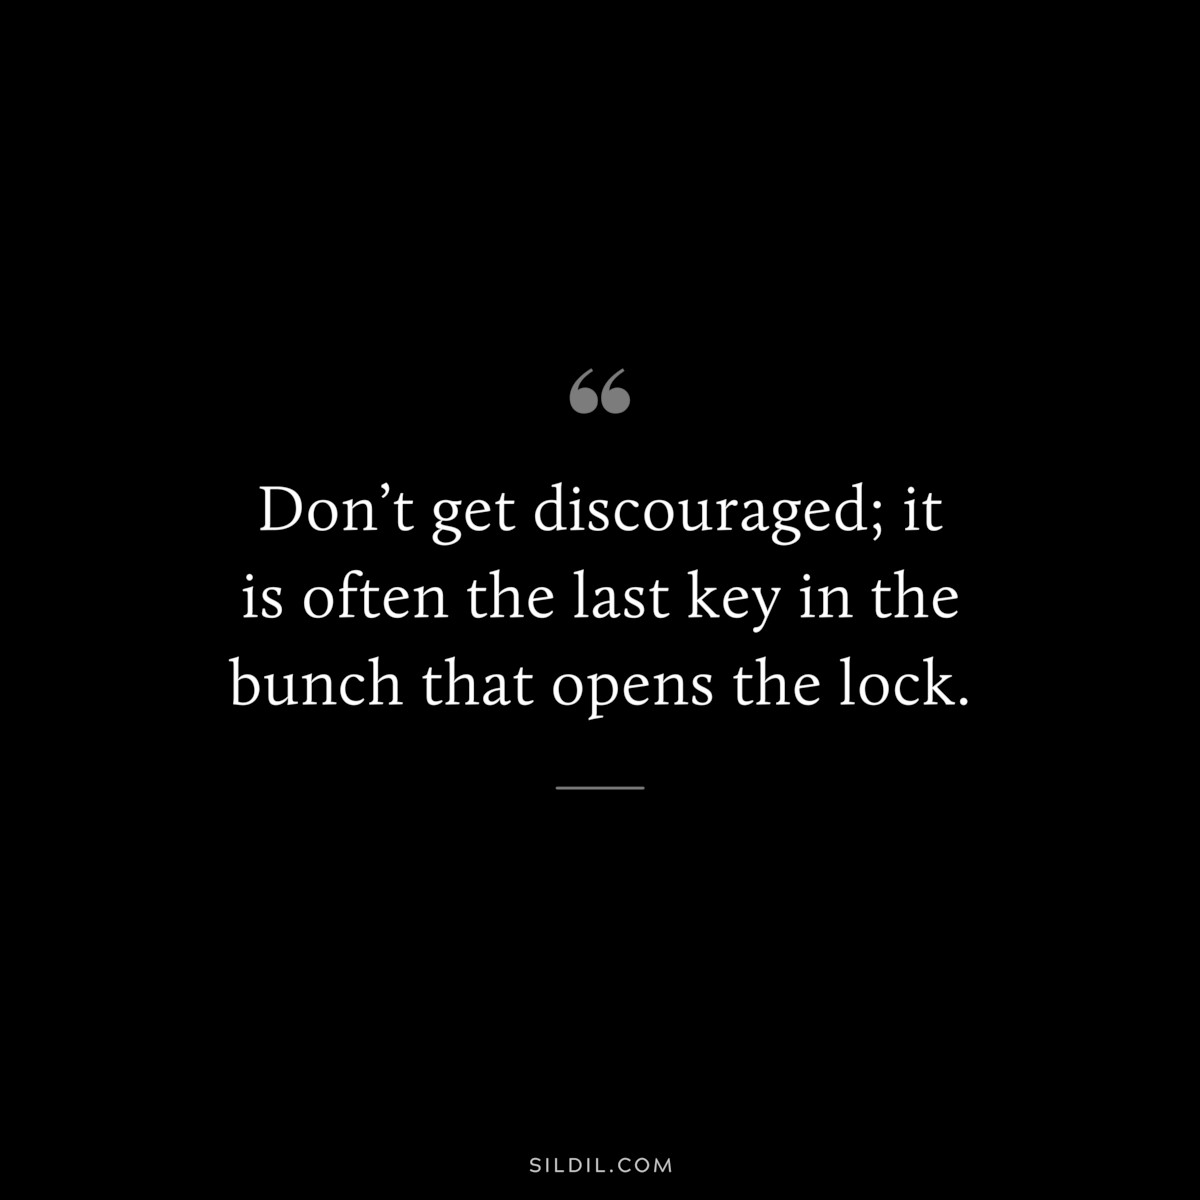 Don’t get discouraged; it is often the last key in the bunch that opens the lock.